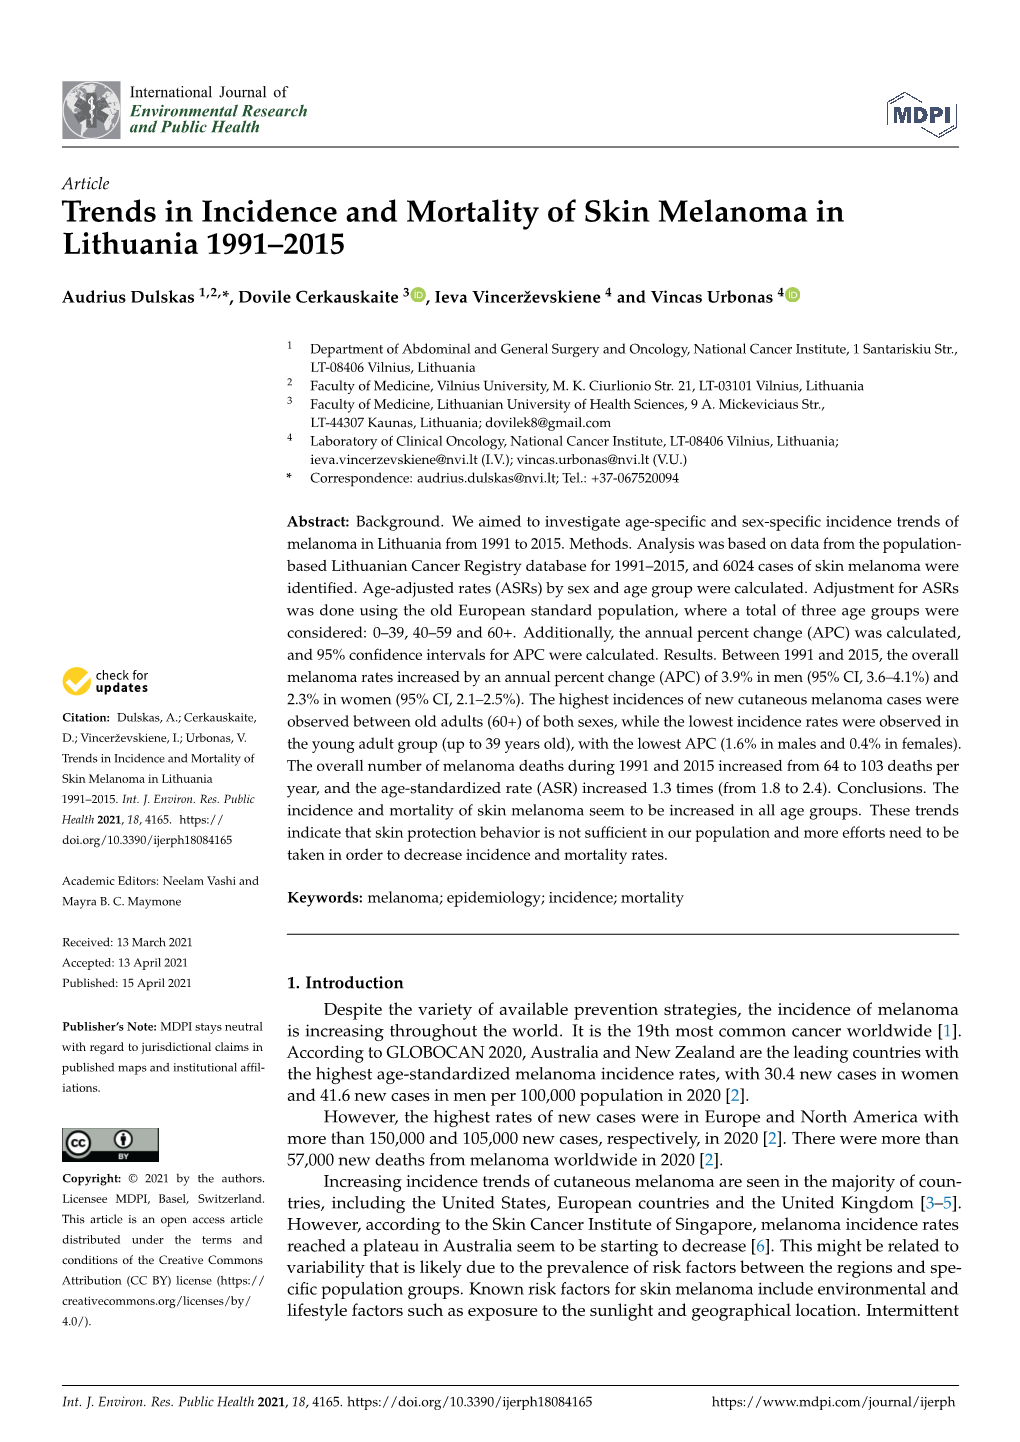 Trends in Incidence and Mortality of Skin Melanoma in Lithuania 1991–2015